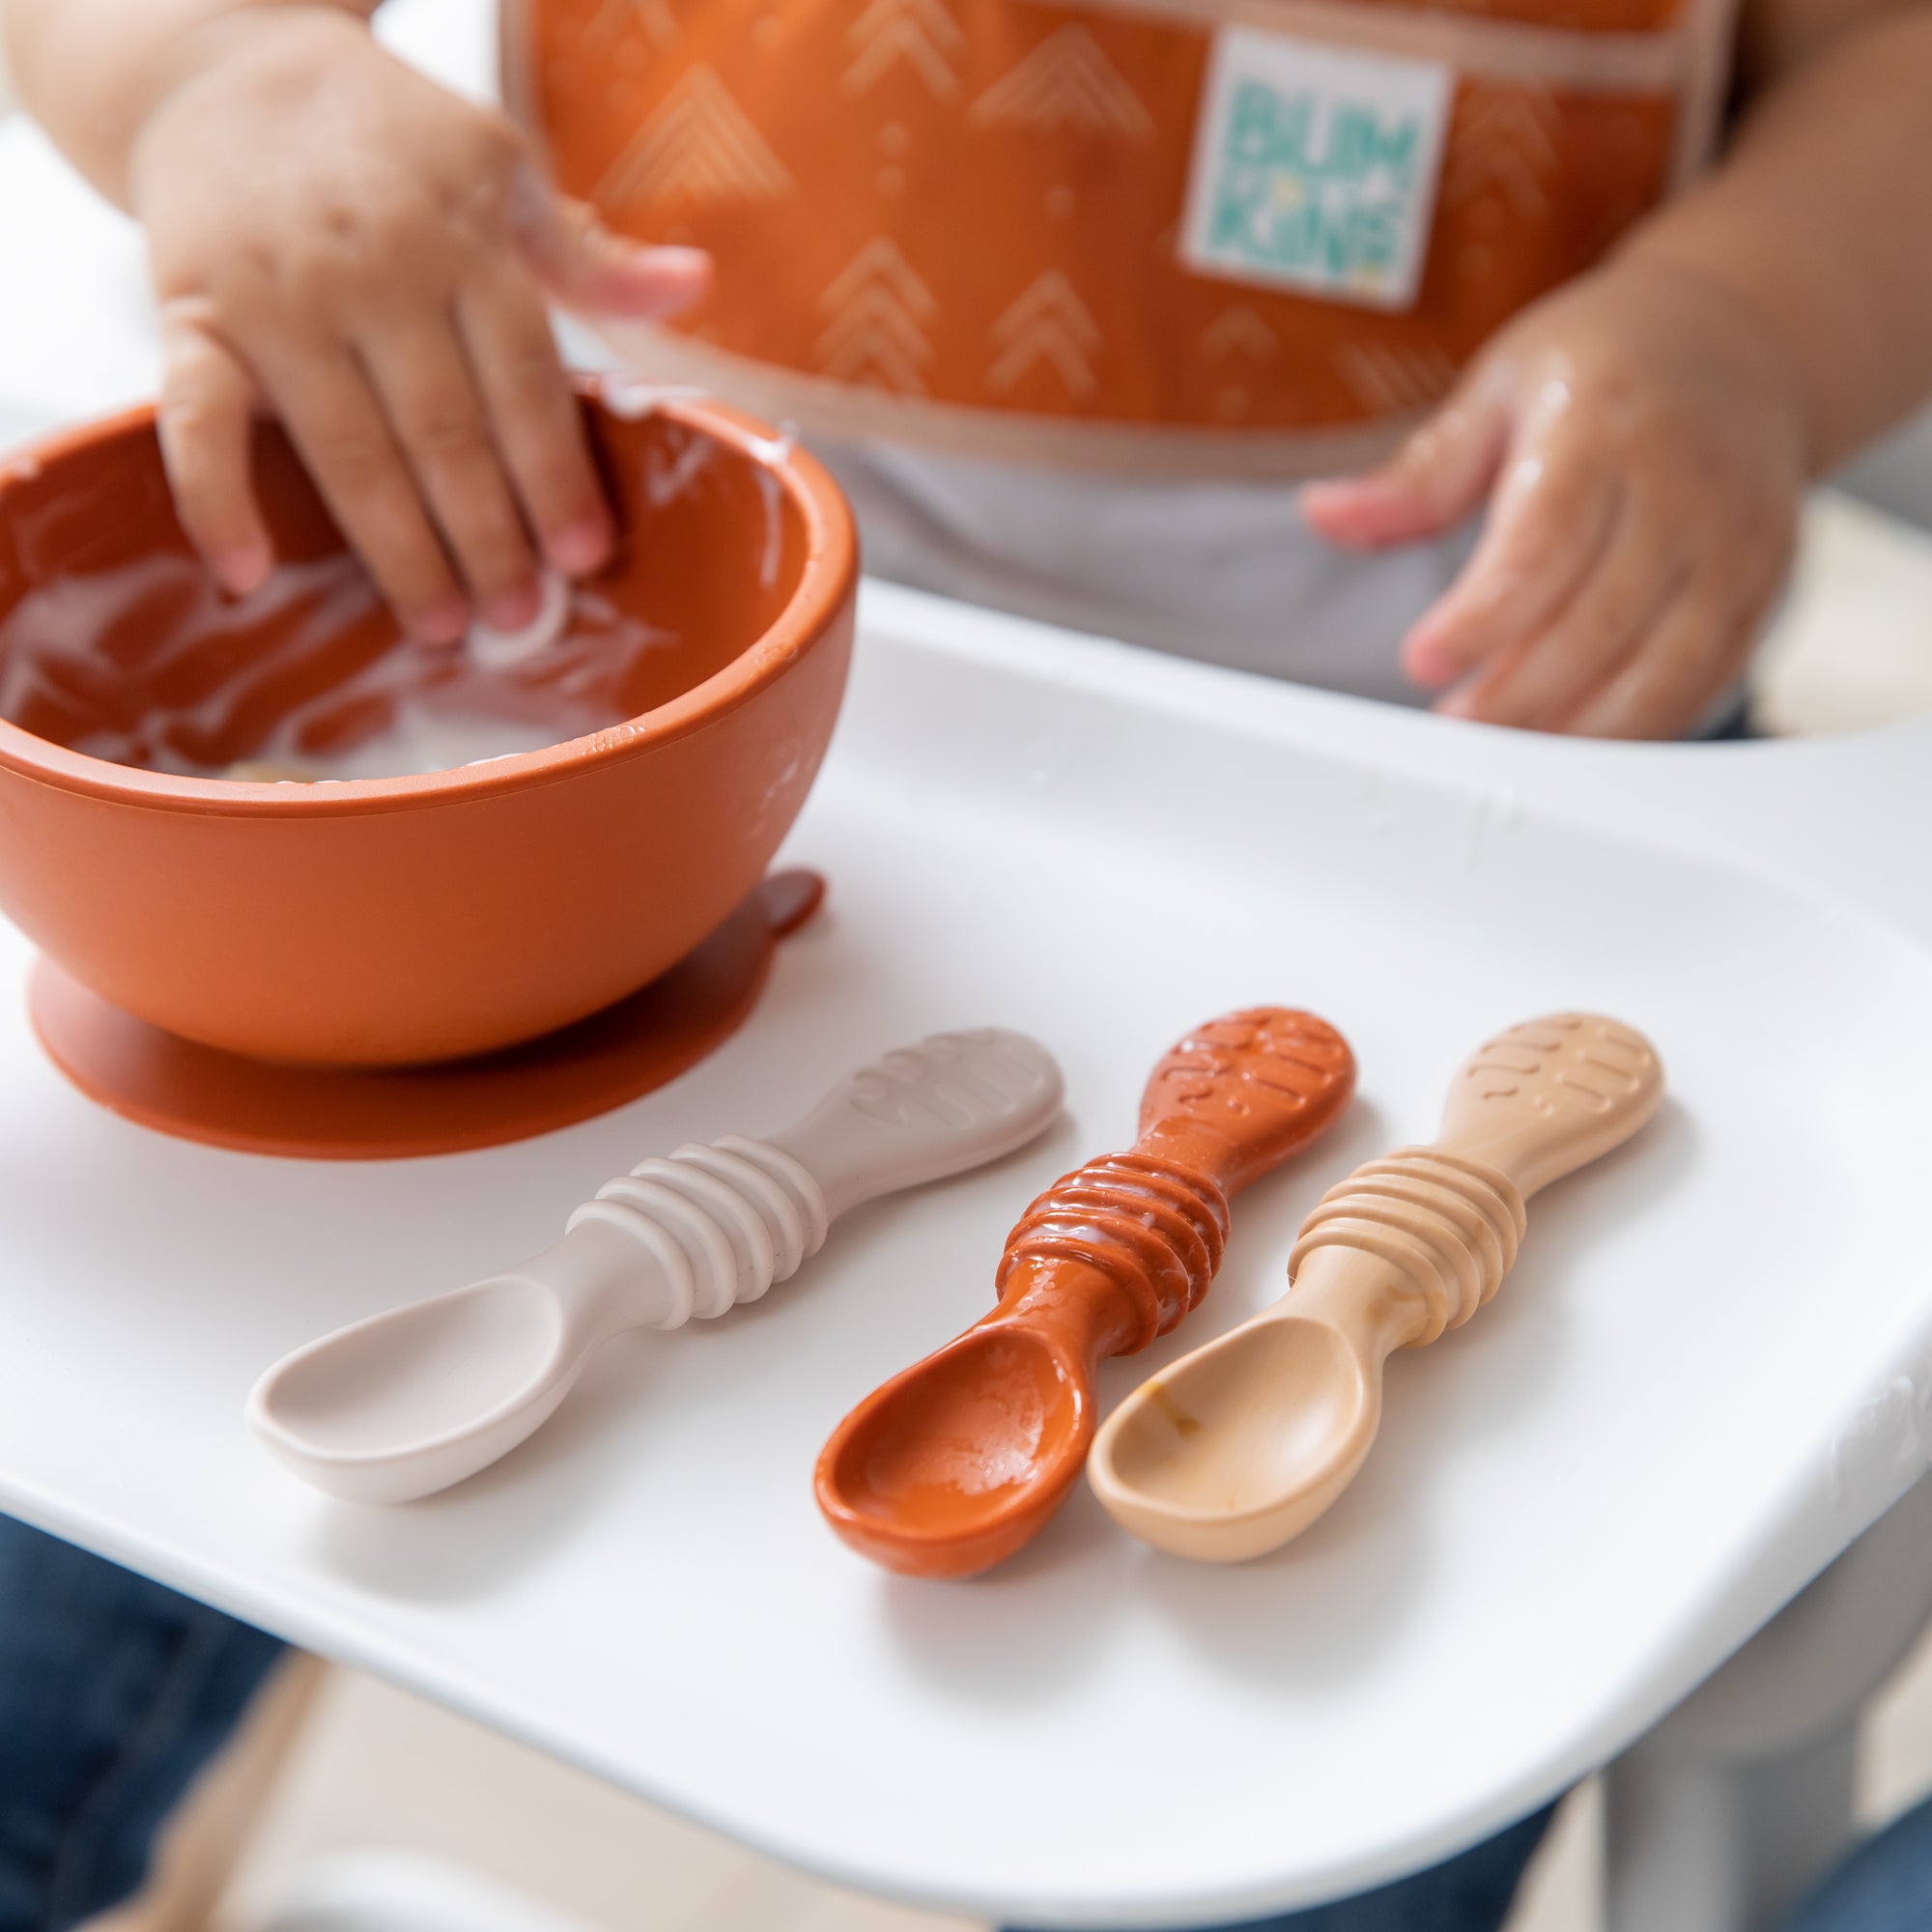 Bumkins Silicone Dipping Spoons - Rocky Road